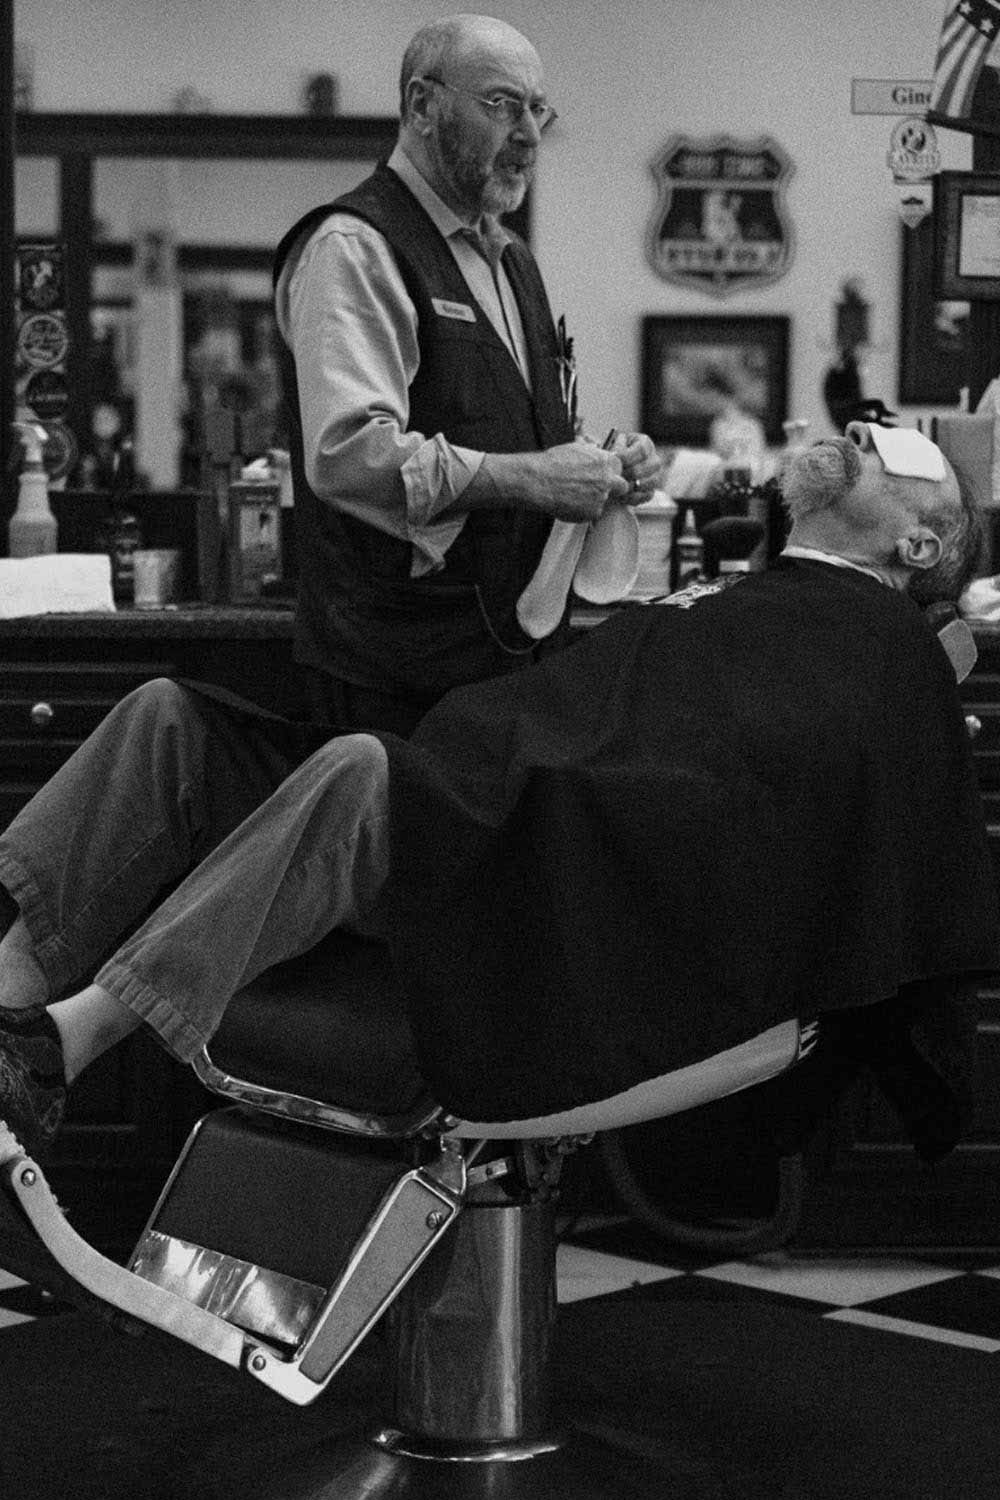 Ginos Classic Barbers 1